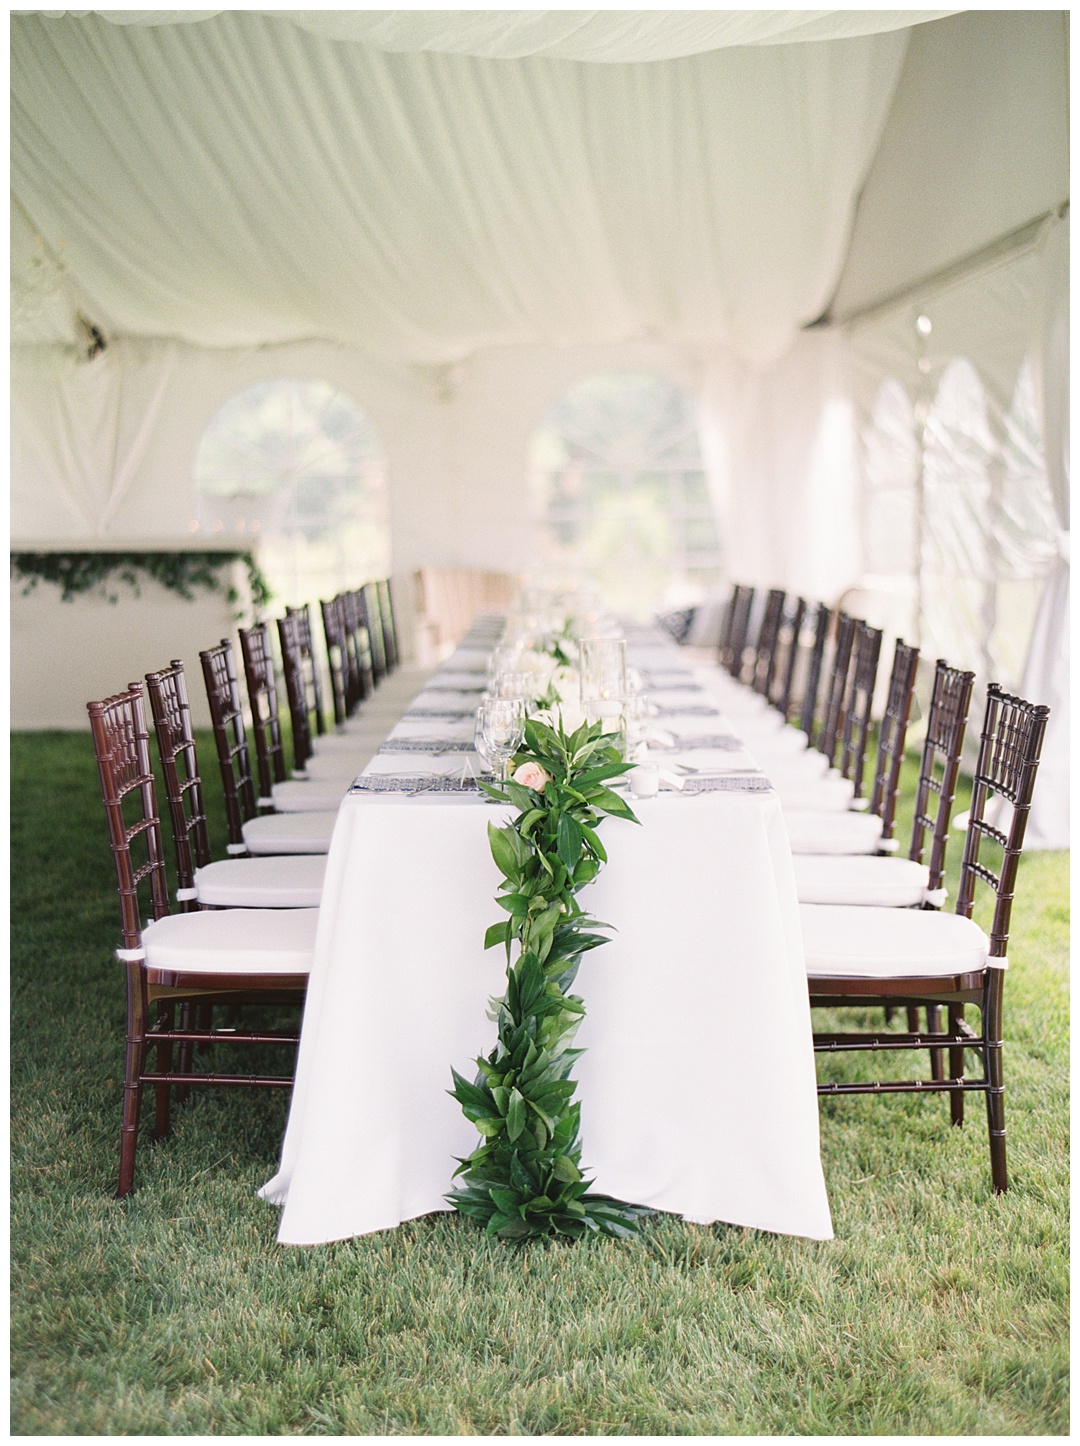 Tent Reception Table Decor Lush Backyard Wedding on Film Featured on Magnolia Rouge with Sarah Sunstrom Photography